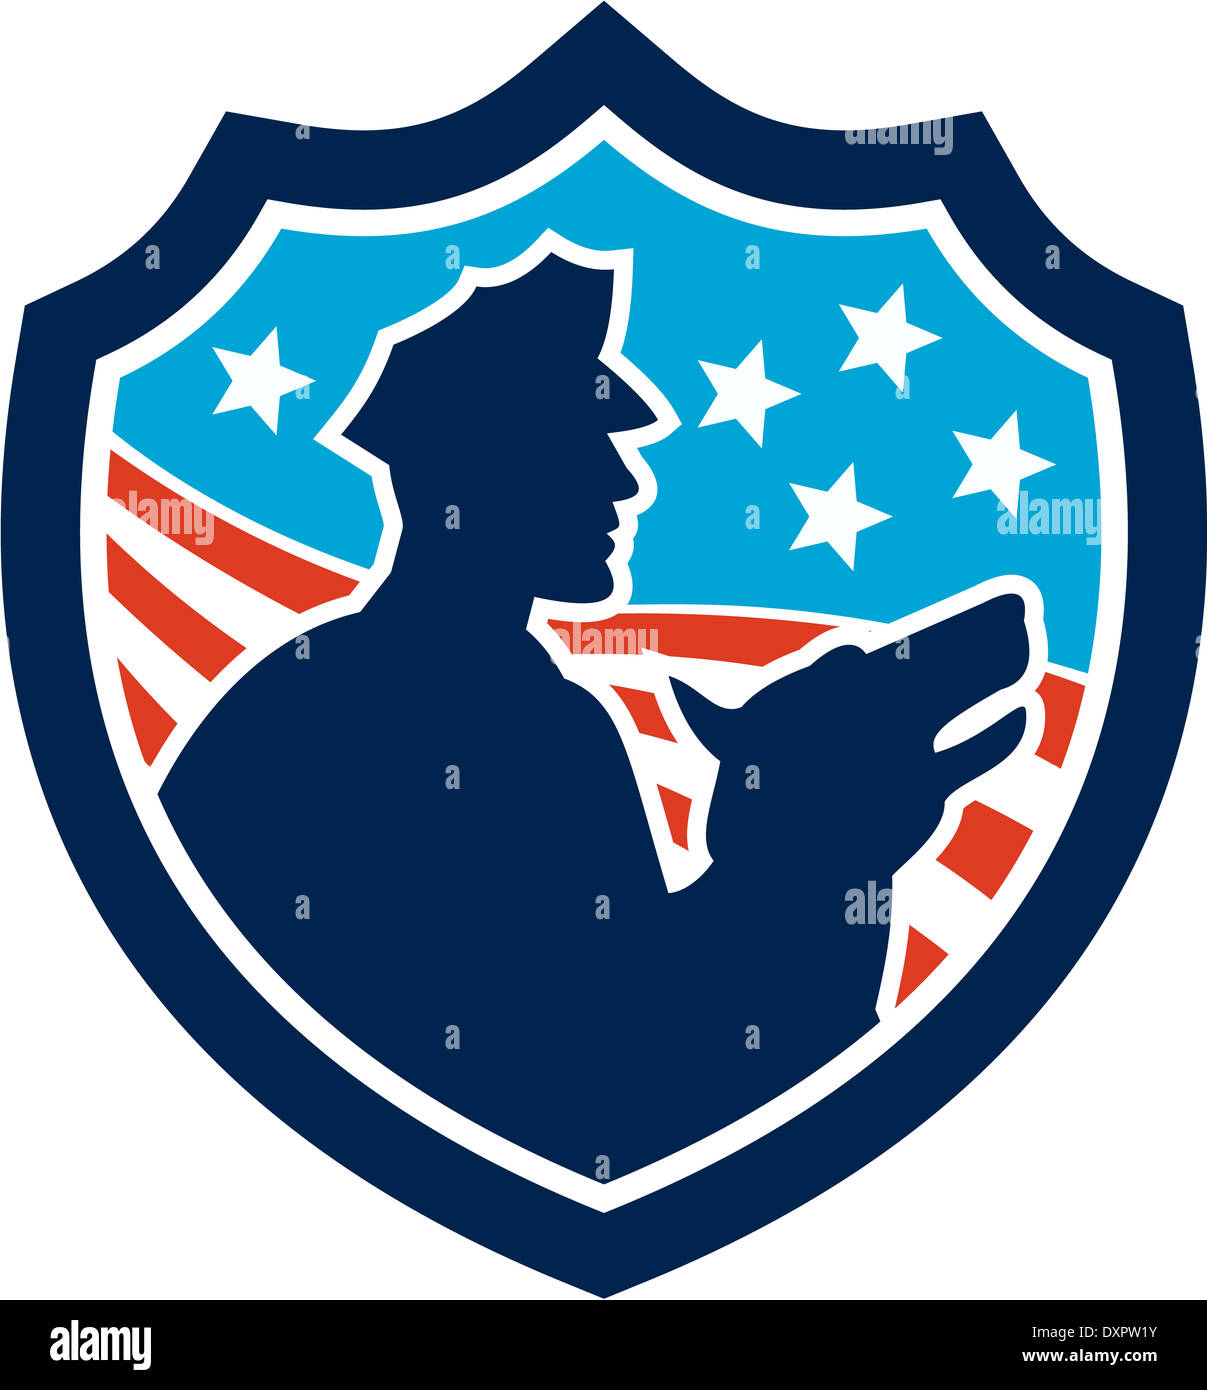 Illustration of a silhouette of a policeman security guard with police dog with American stars and stripes set inside shield done in retro style. Stock Photo